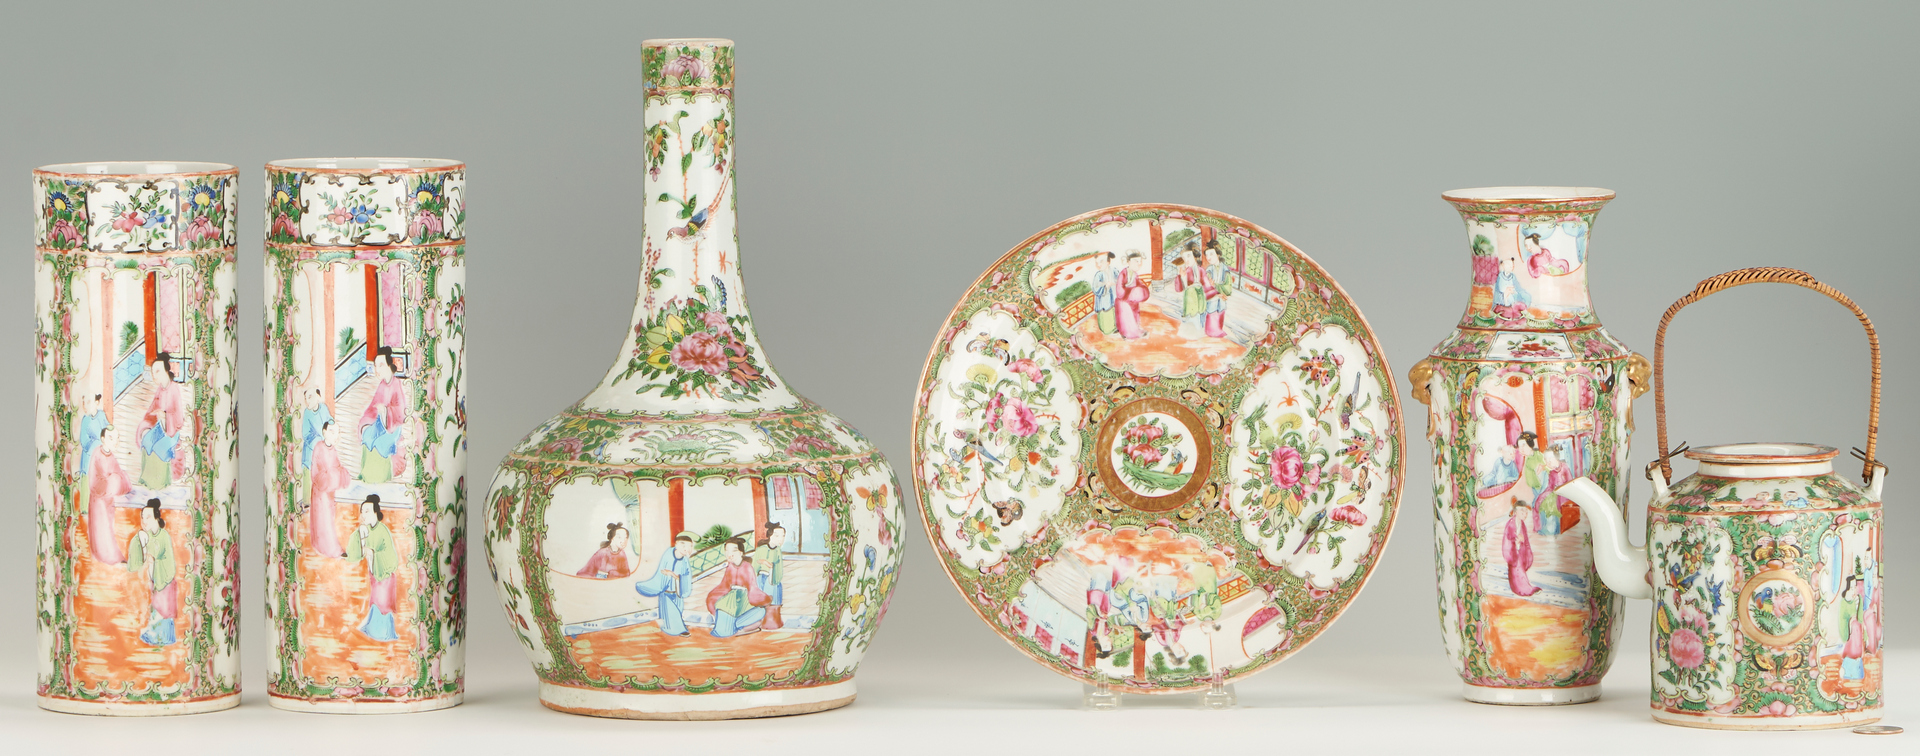 Lot 29: Six (6) Chinese Export Rose Medallion Porcelain Items